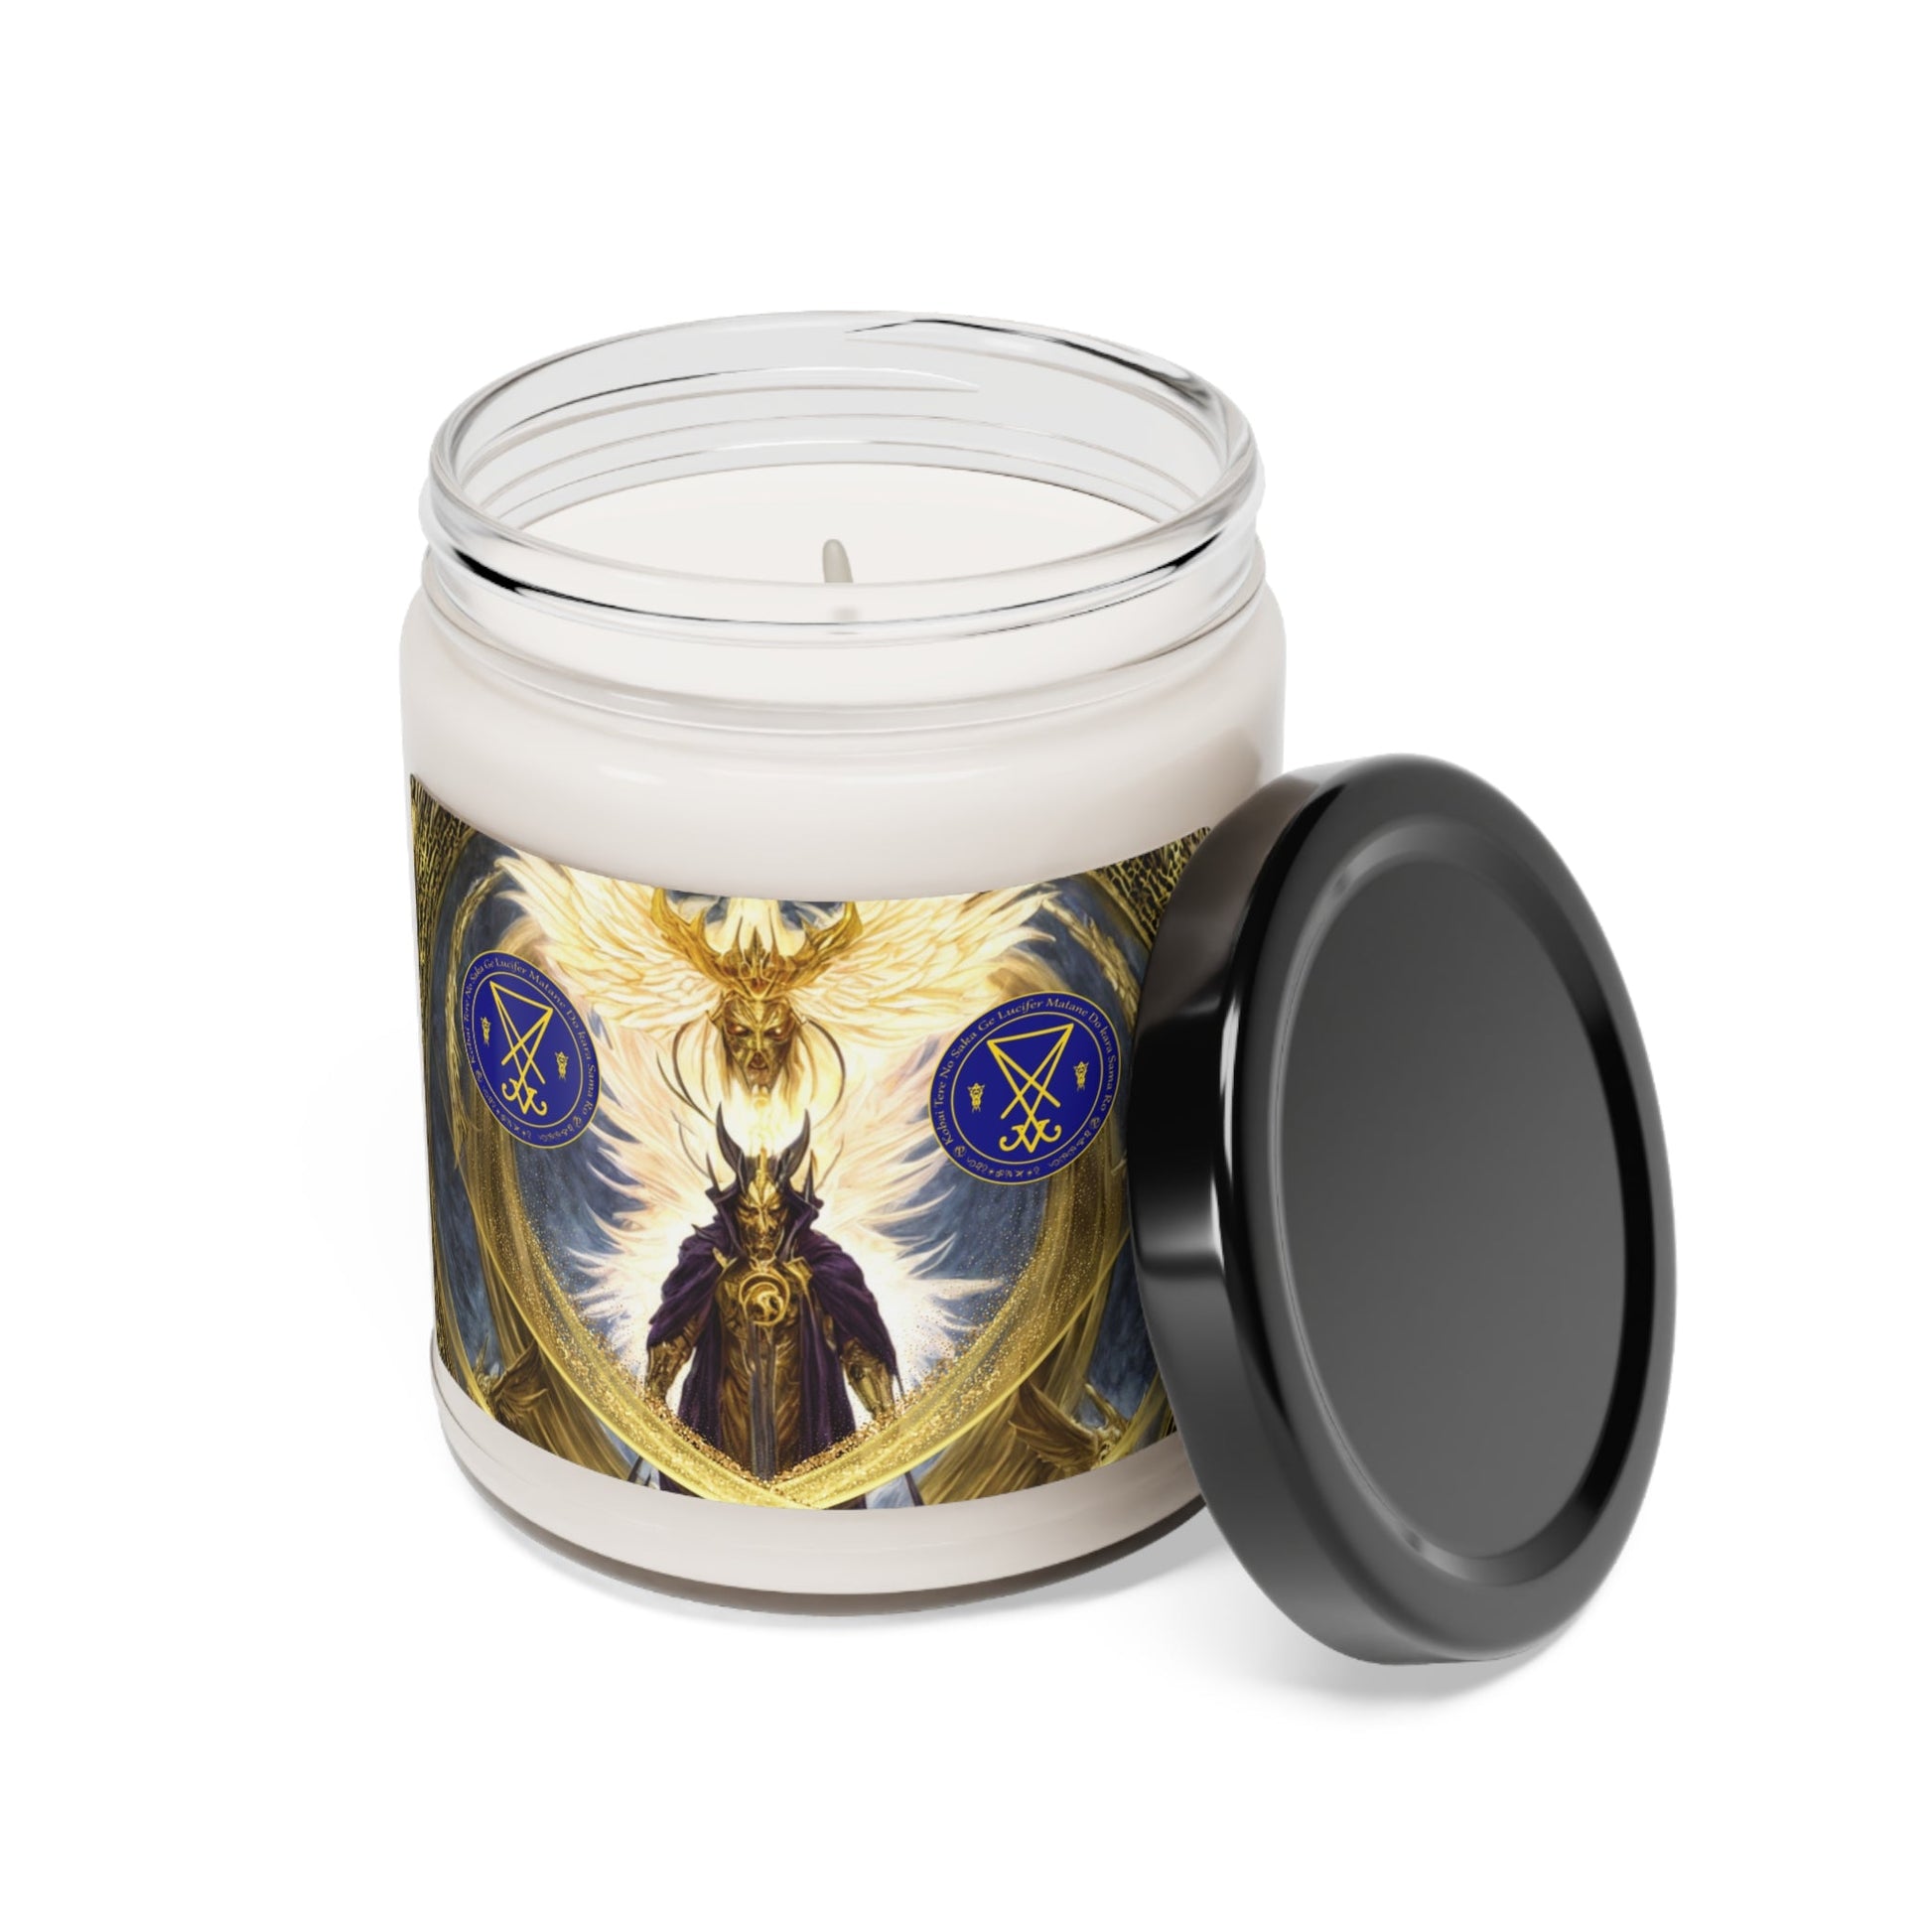 Demon-Lucifer-Scented-Soy-Candle-for-Altar-offerings-rituals-initiations-or-praying-and-meditation-17